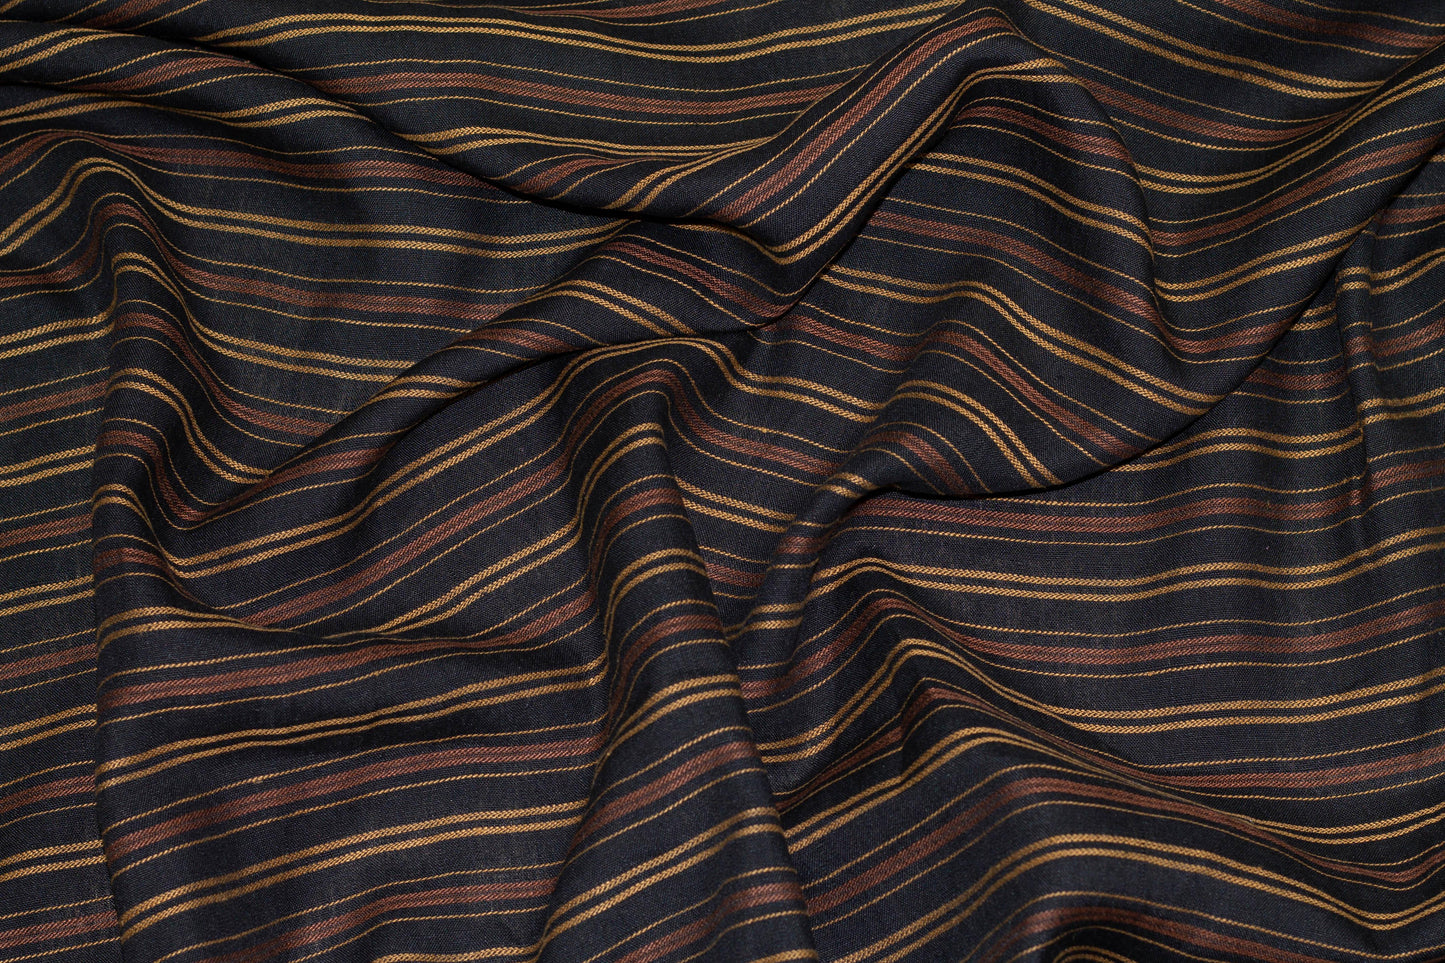 Black, Brown, and Gold Striped Linen - Prime Fabrics